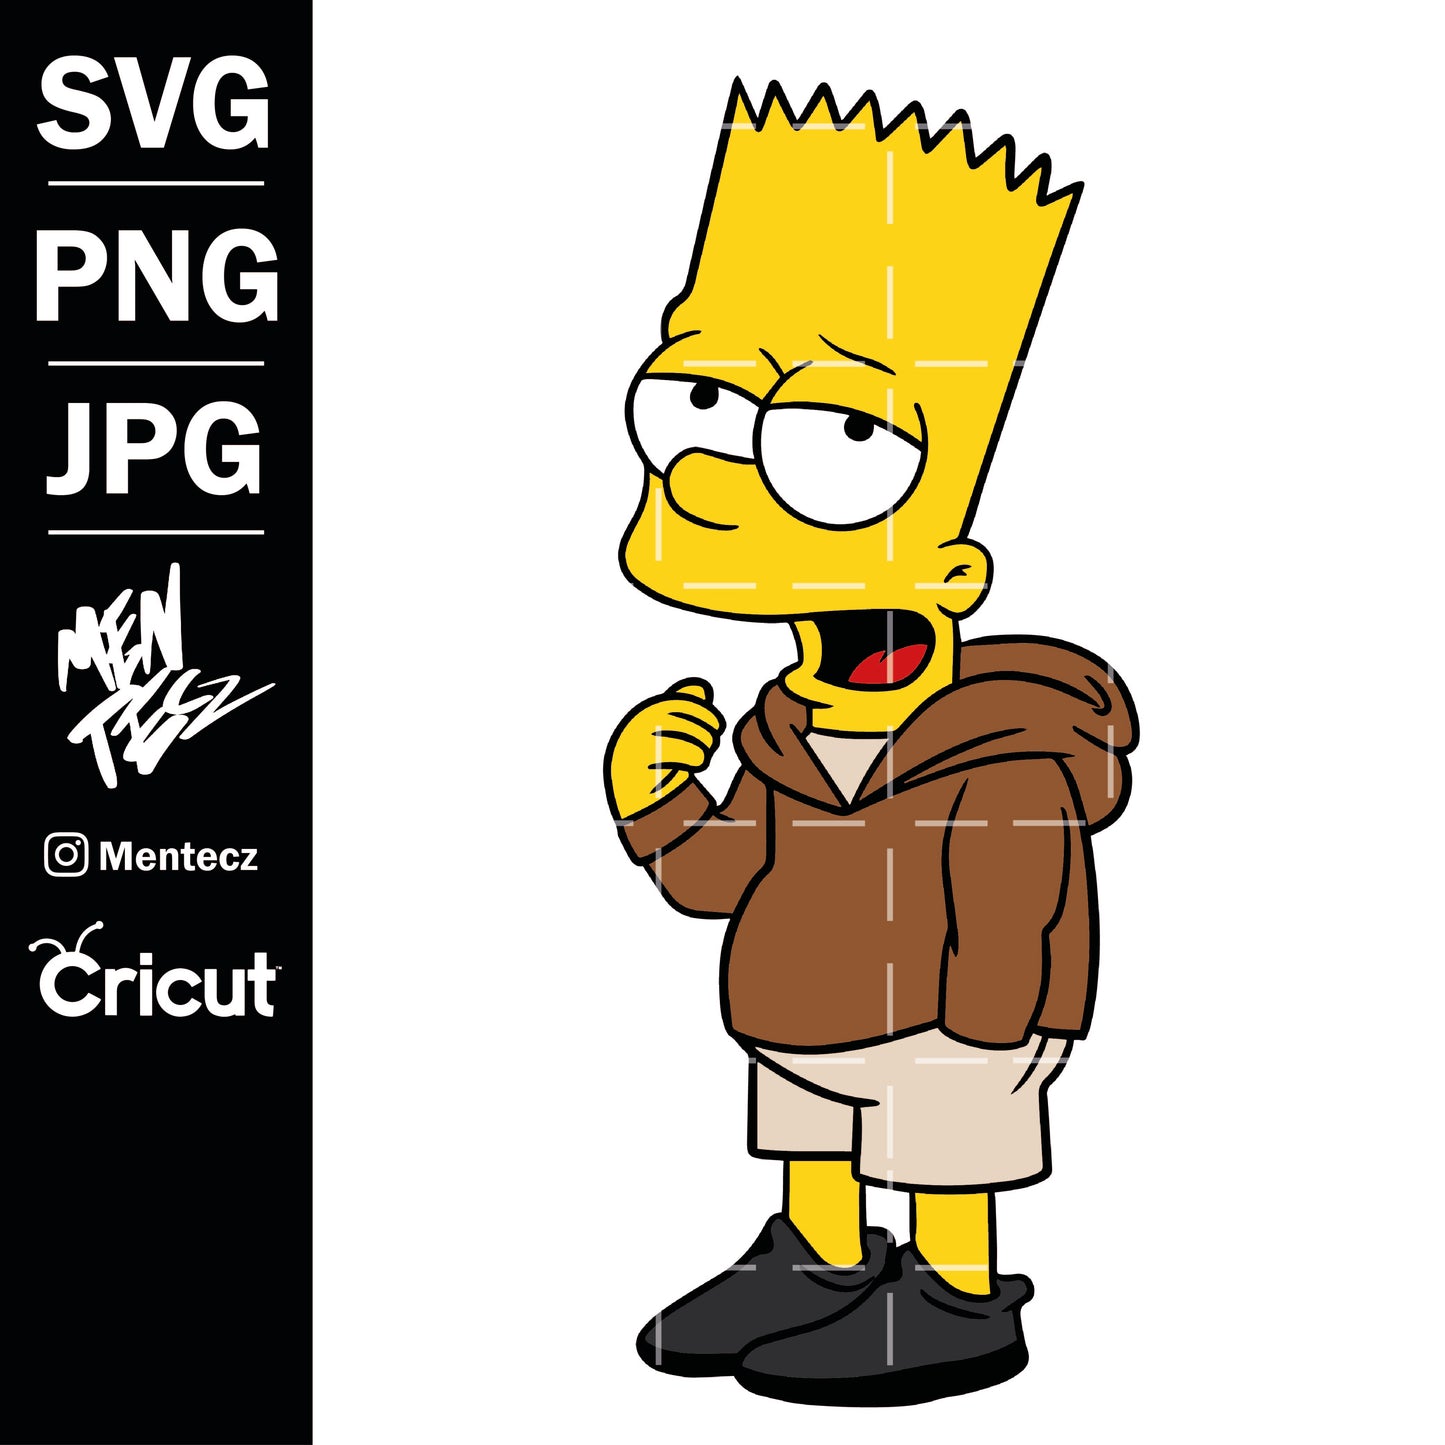 Bart Simpson svg, png, jpg \ the Simpsons